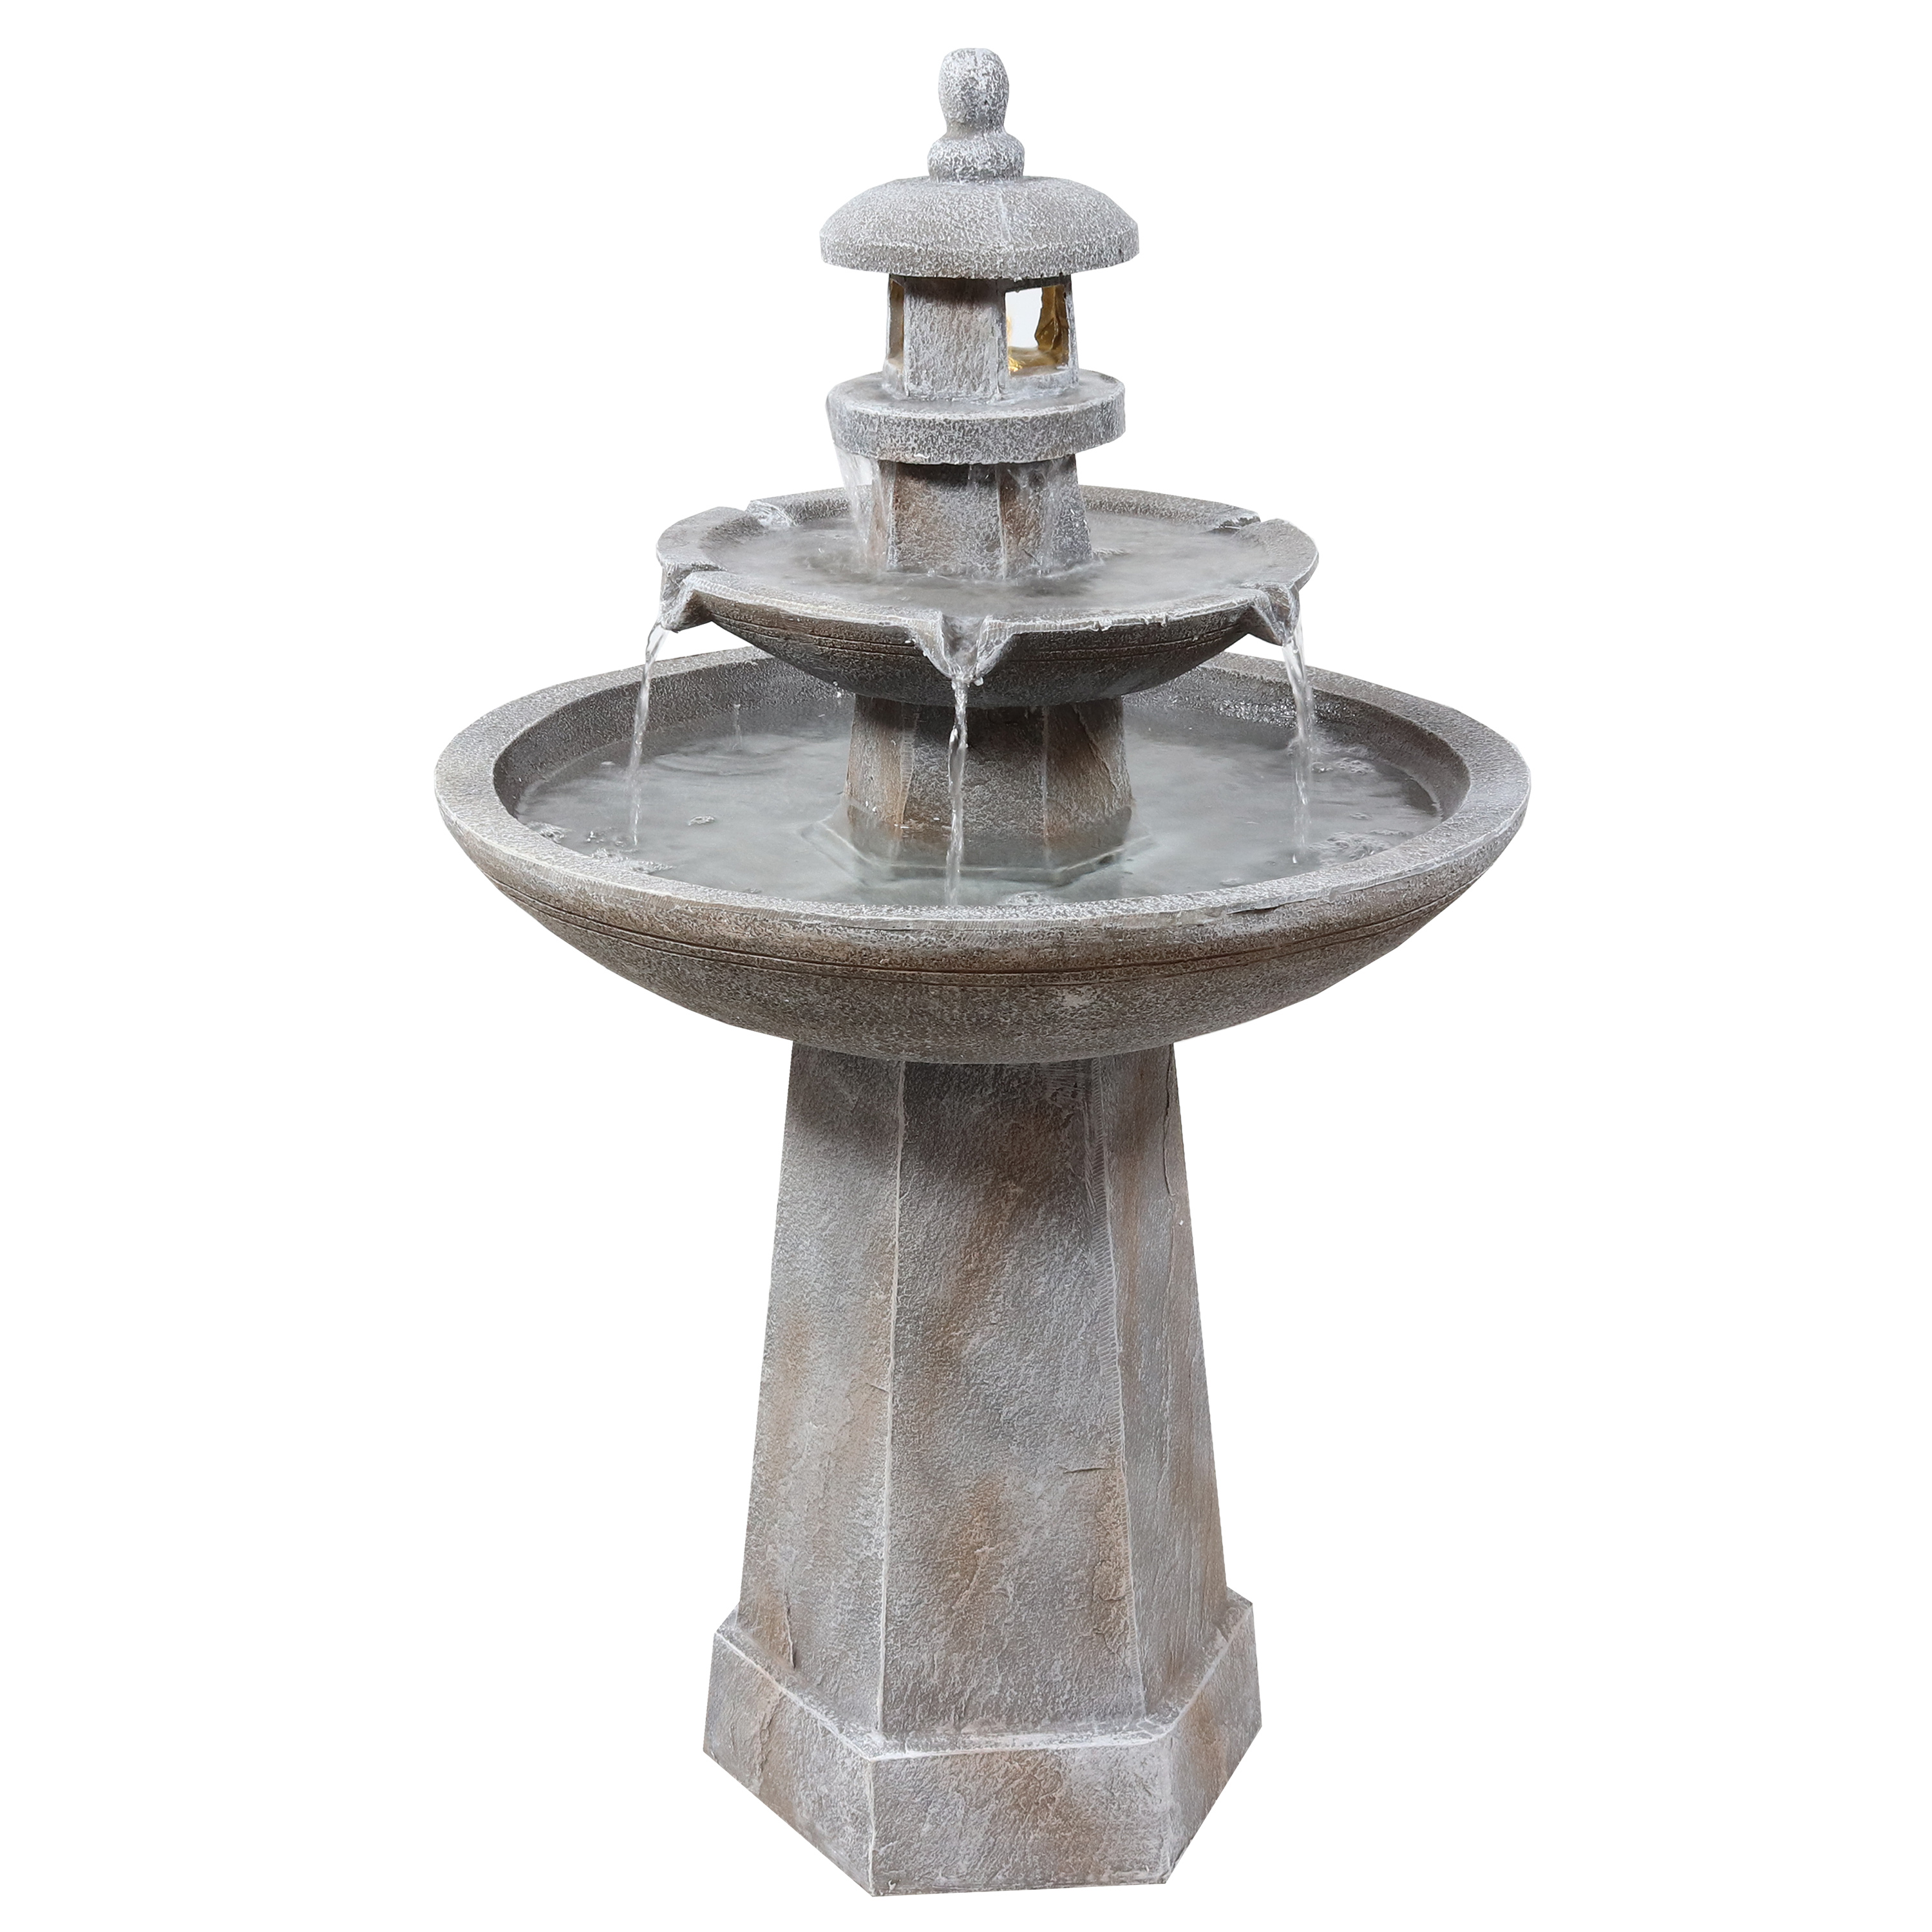 Sunnydaze 2-Tier Pagoda Outdoor Water Fountain with LED Light - 39-Inch